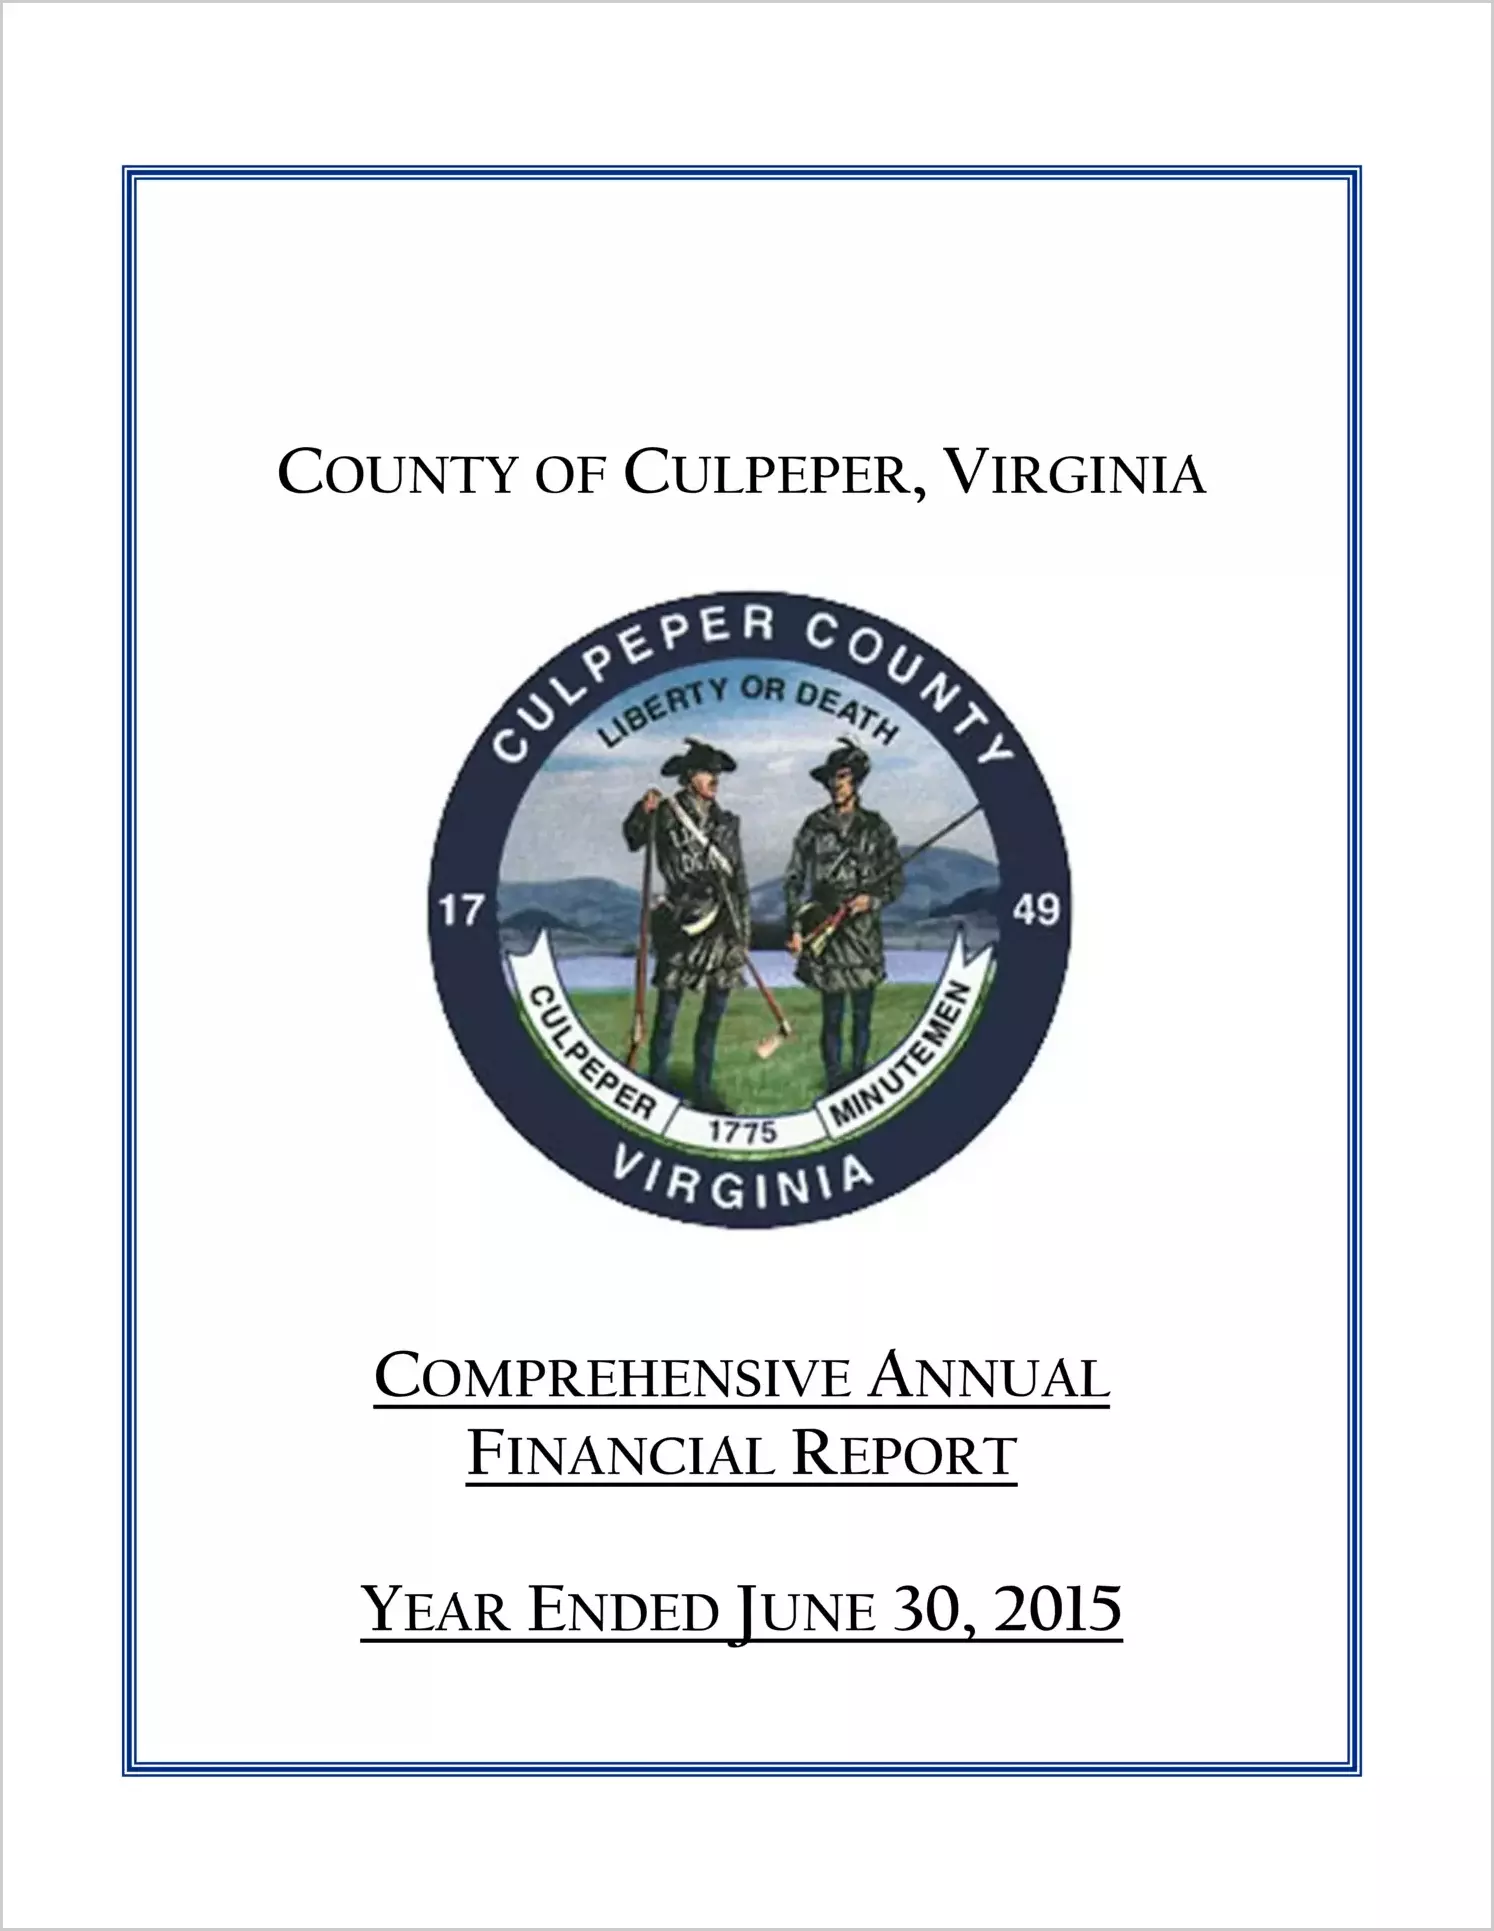 2015 Annual Financial Report for County of Culpeper